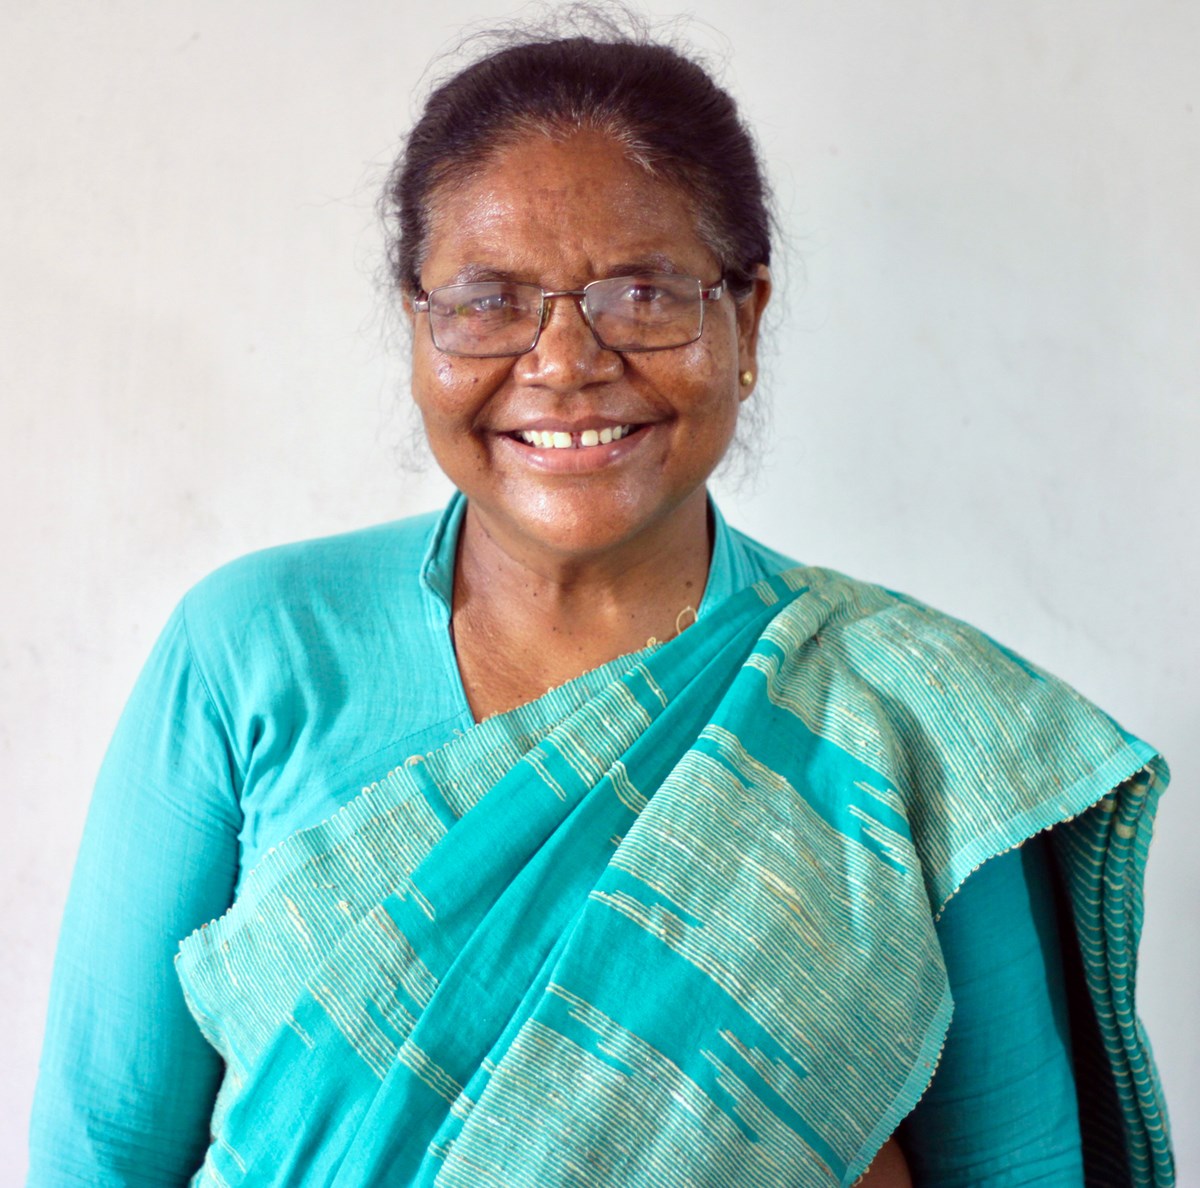 Dayamani Barla is an Adivasi (indigenous) activist, journalist, writer, and storyteller from Jharkhand, Central India.